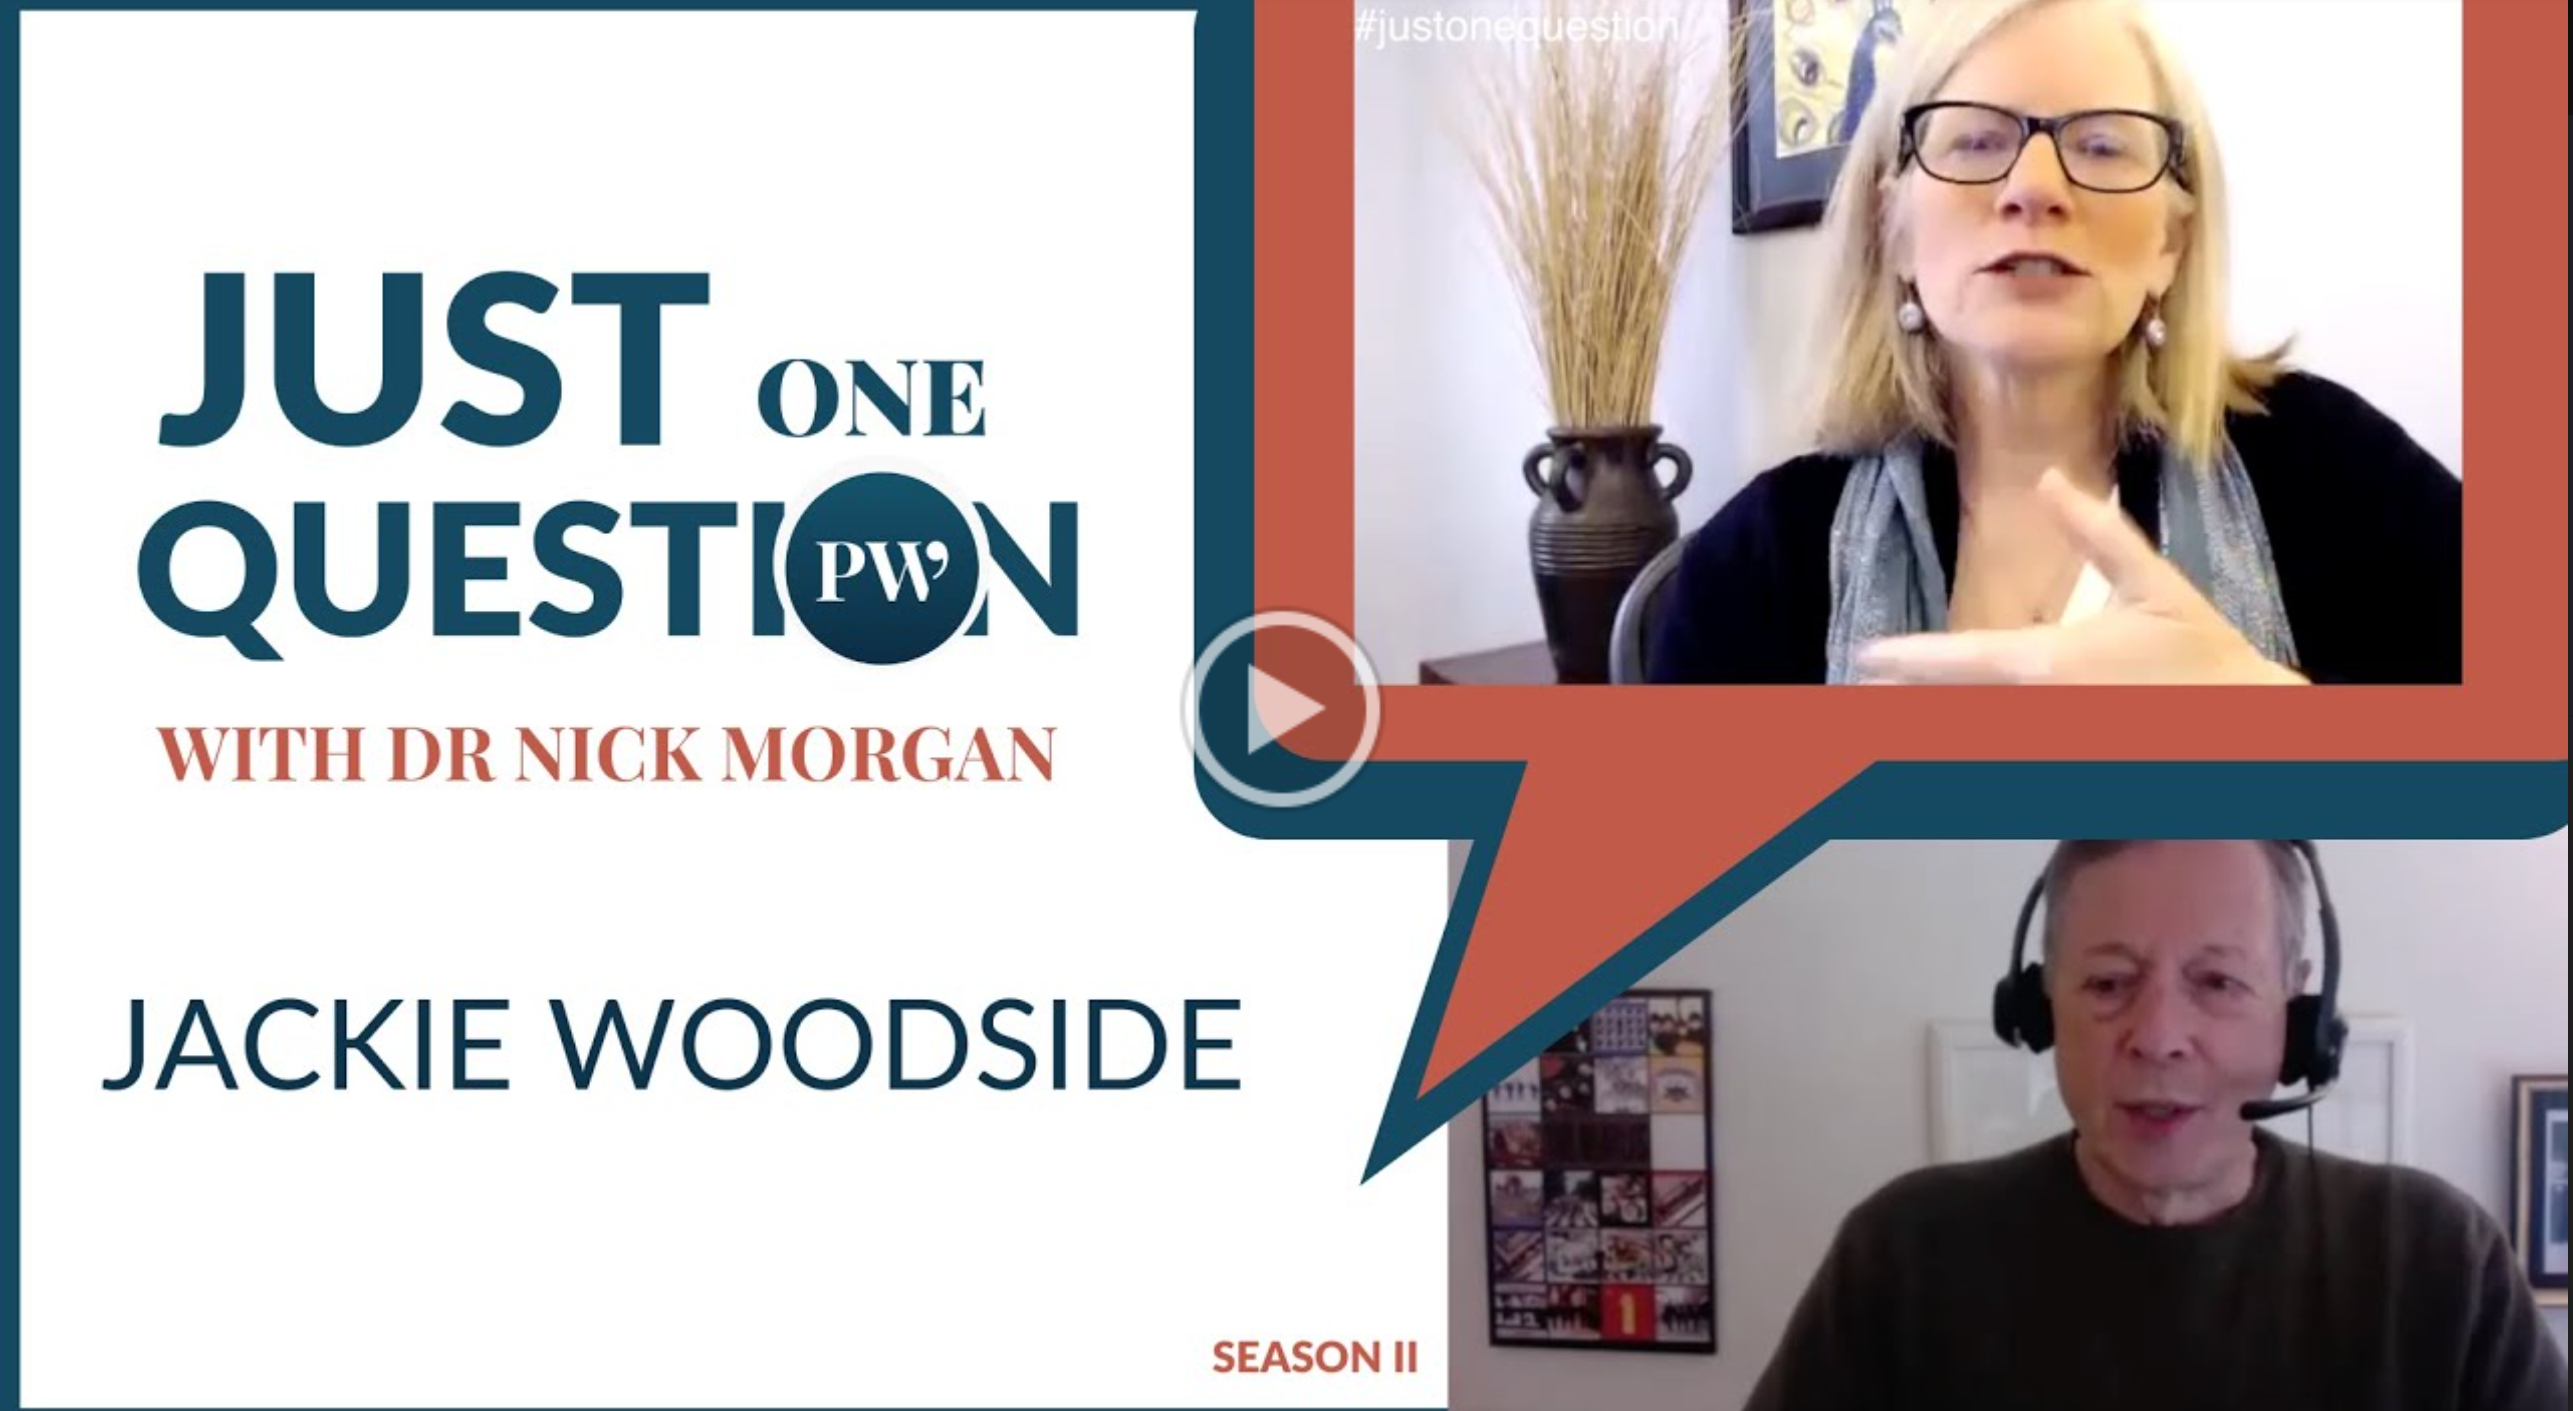 Just One Question Podcast with Dr. Morgan Morgan and Guest Jackie Woodside!